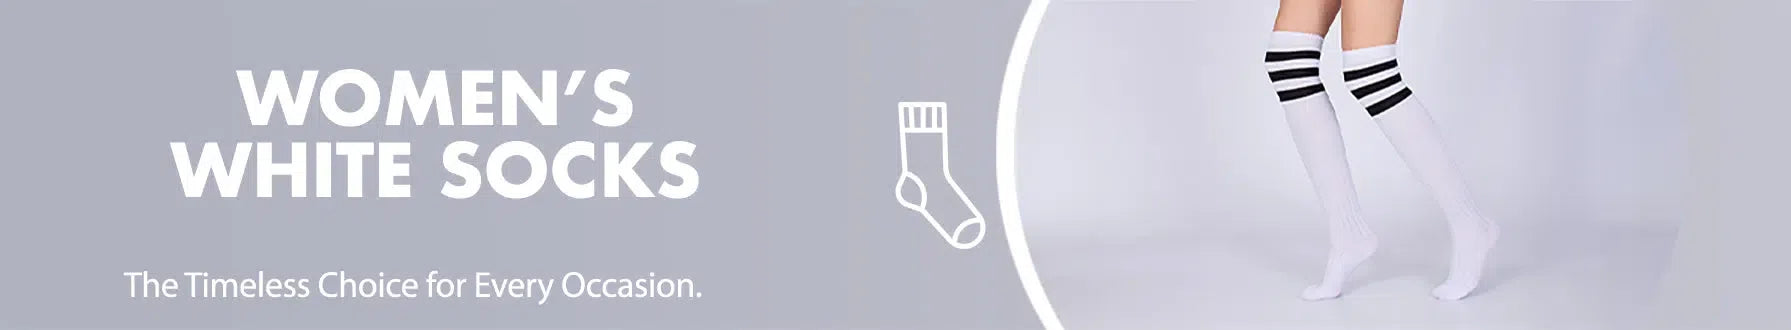 GoWith women's white socks collection banner desktop